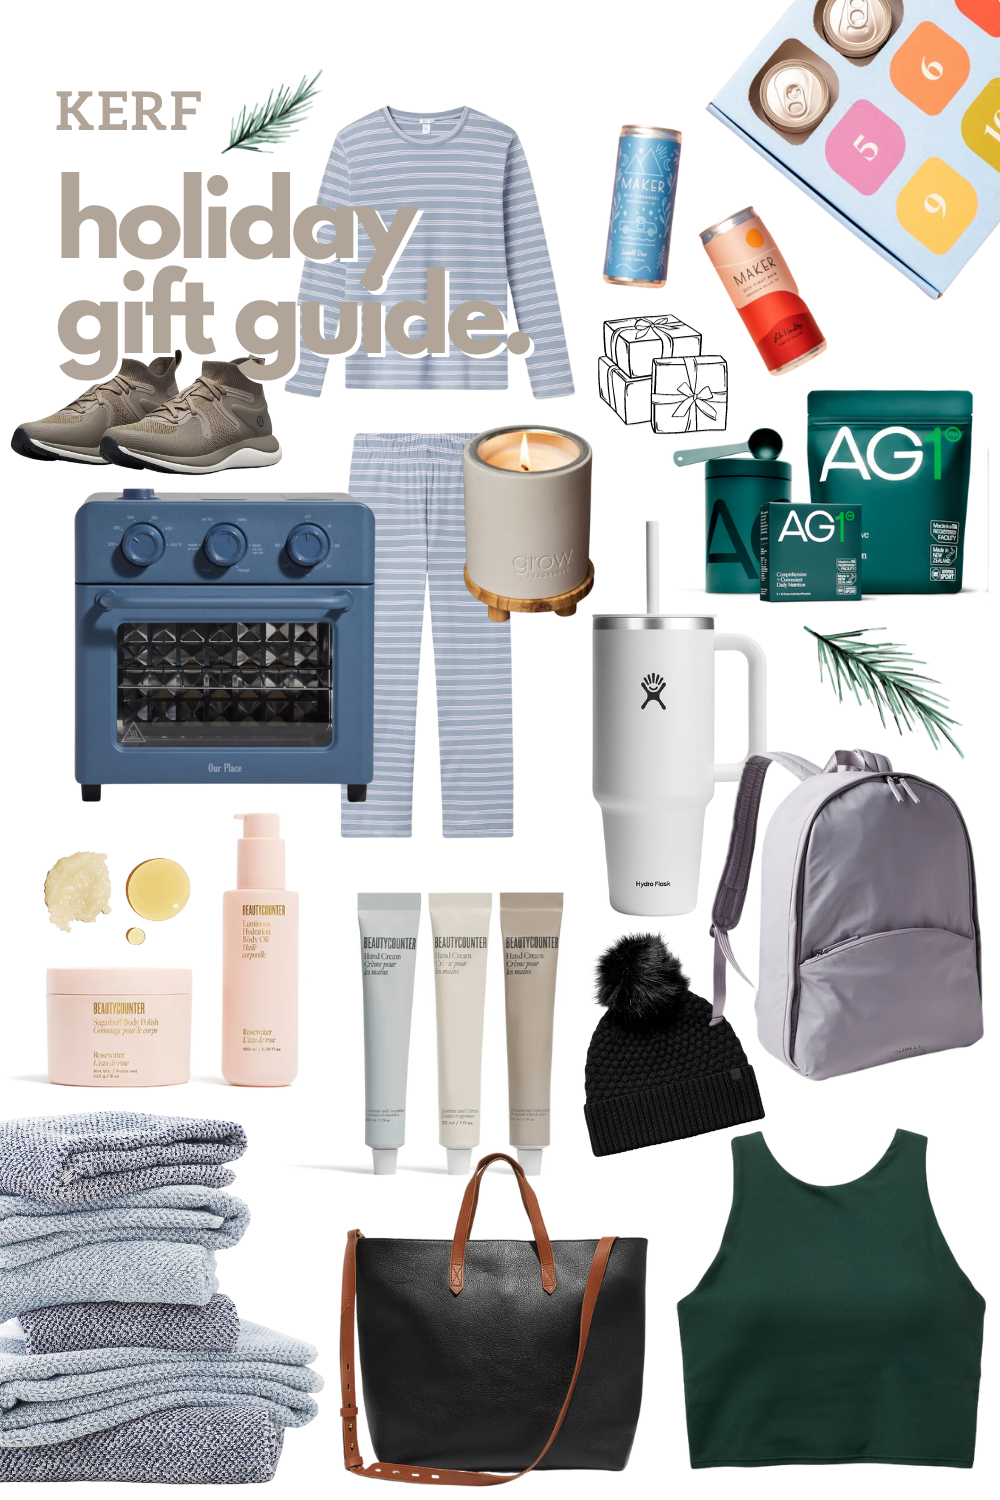 KERF Holiday Gift Guide